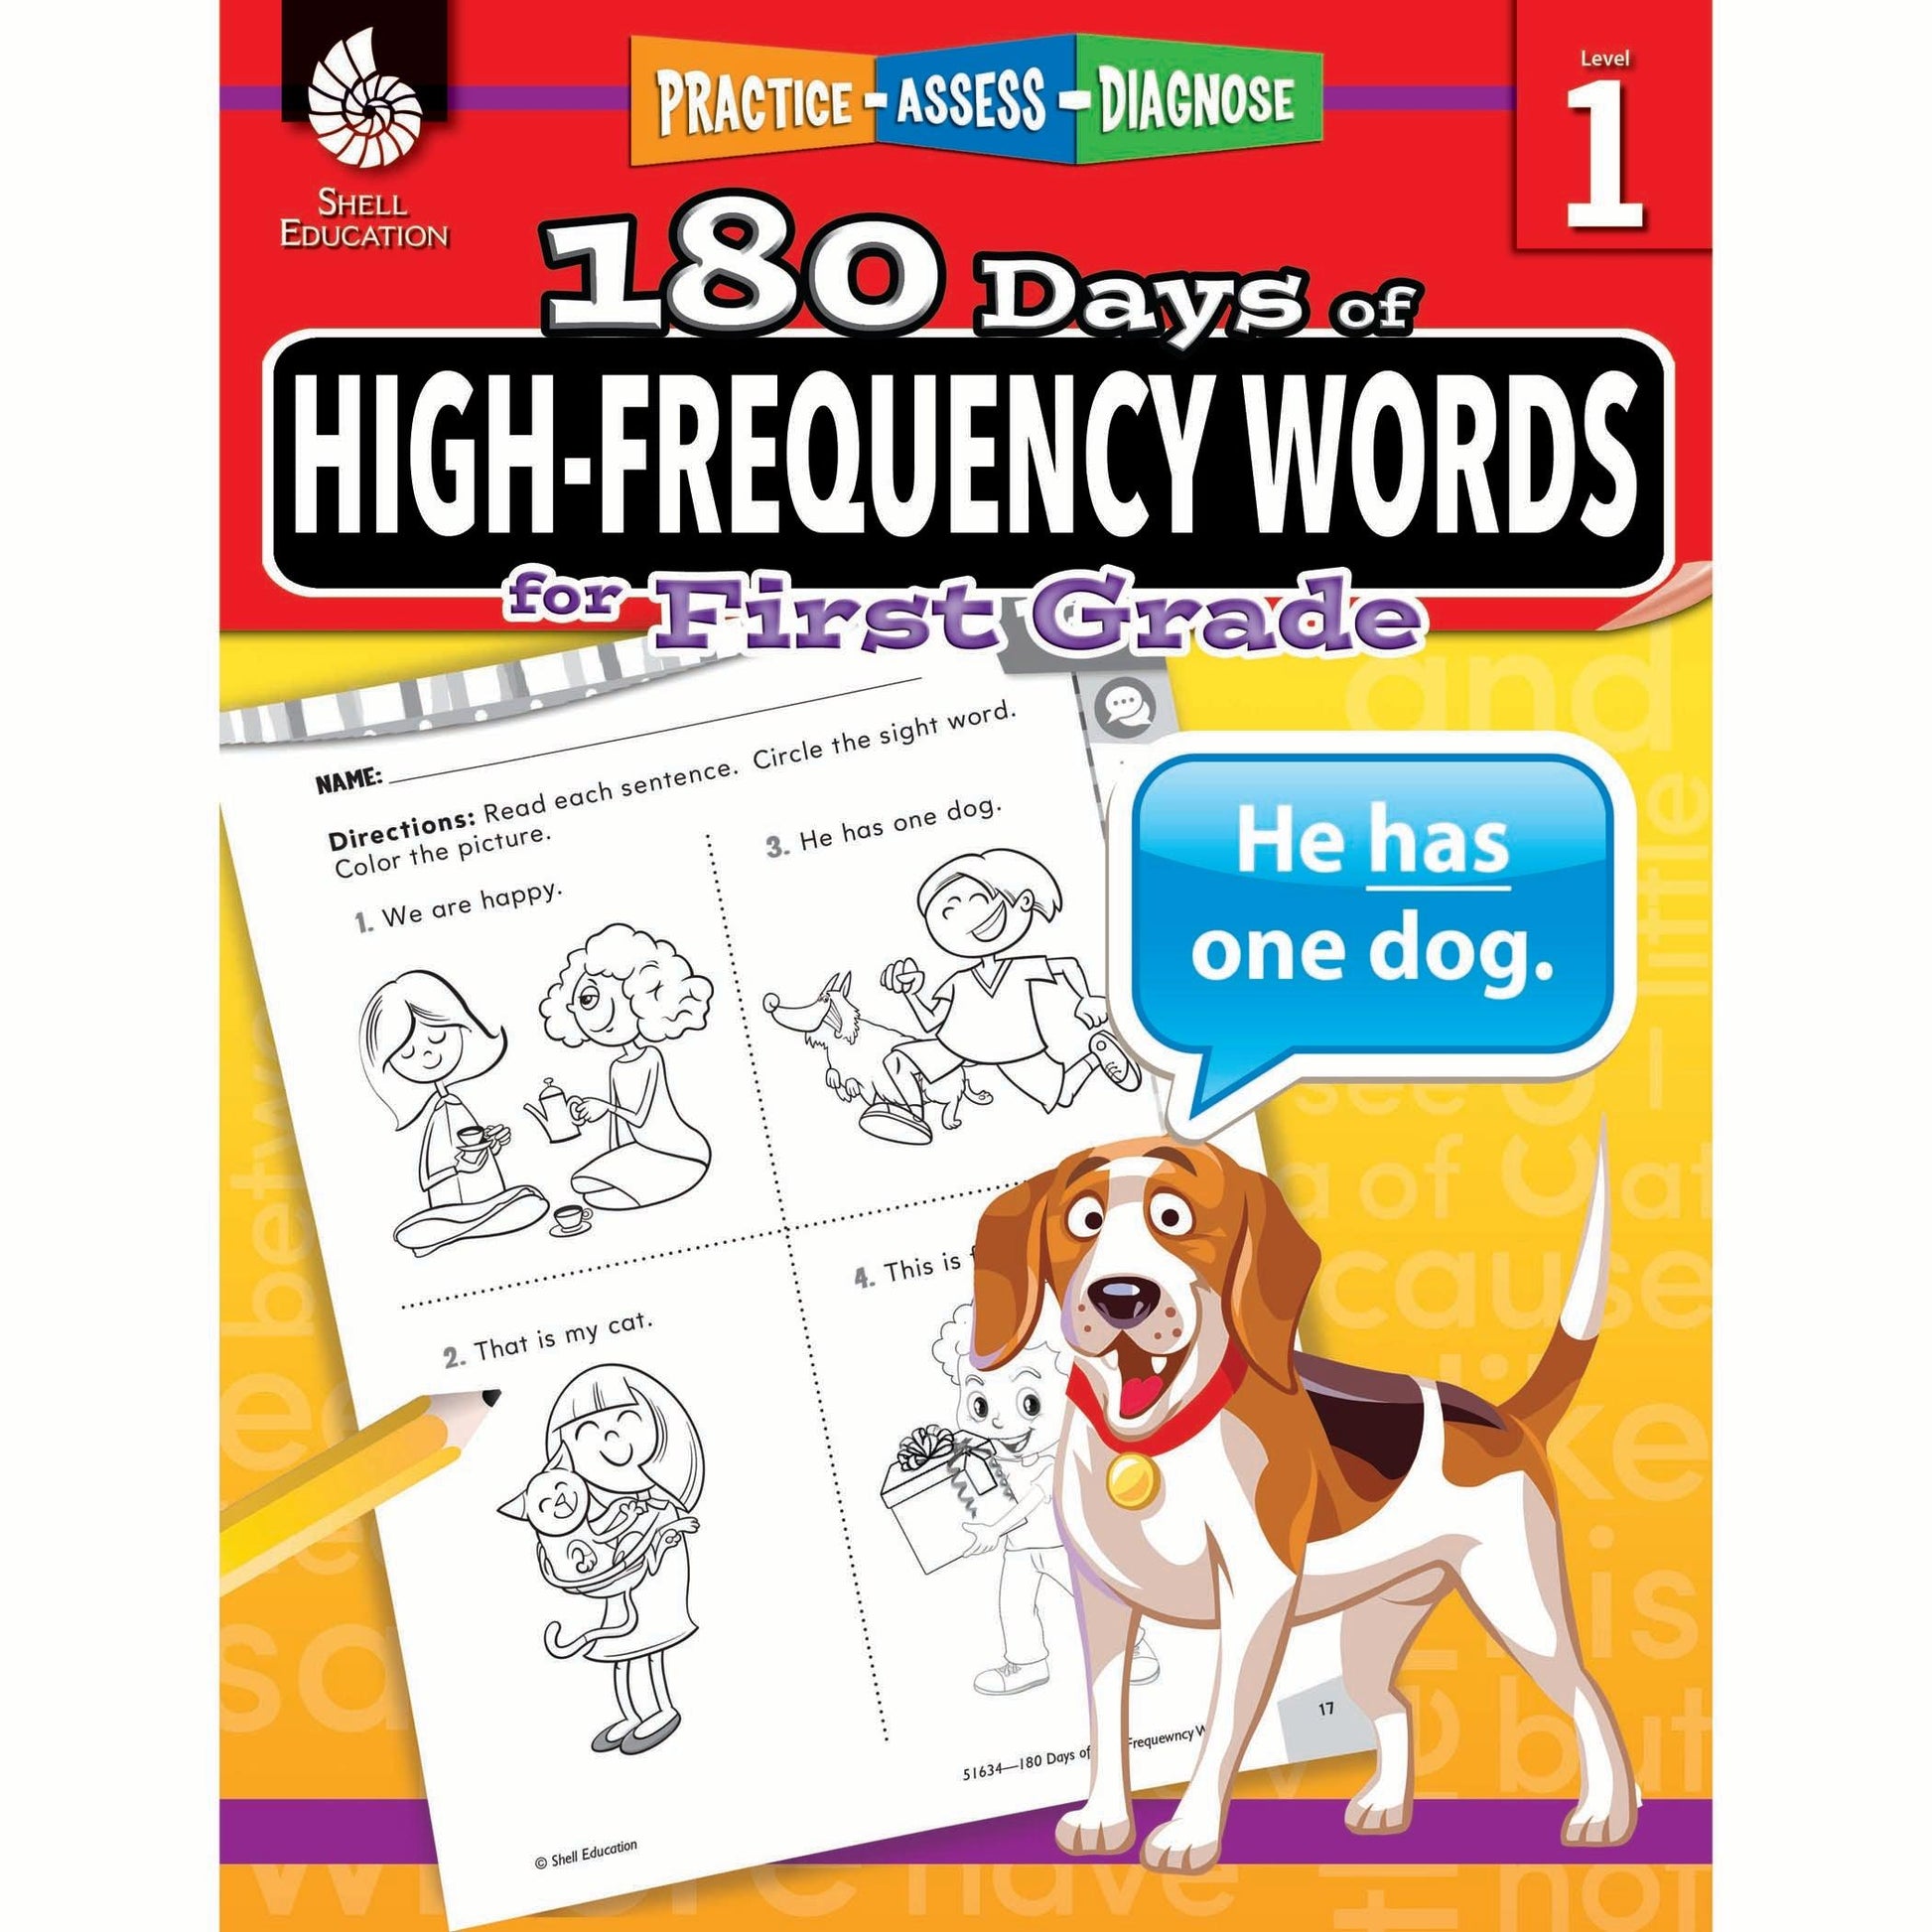 180 Days of High-Frequency Words for First Grade - Loomini